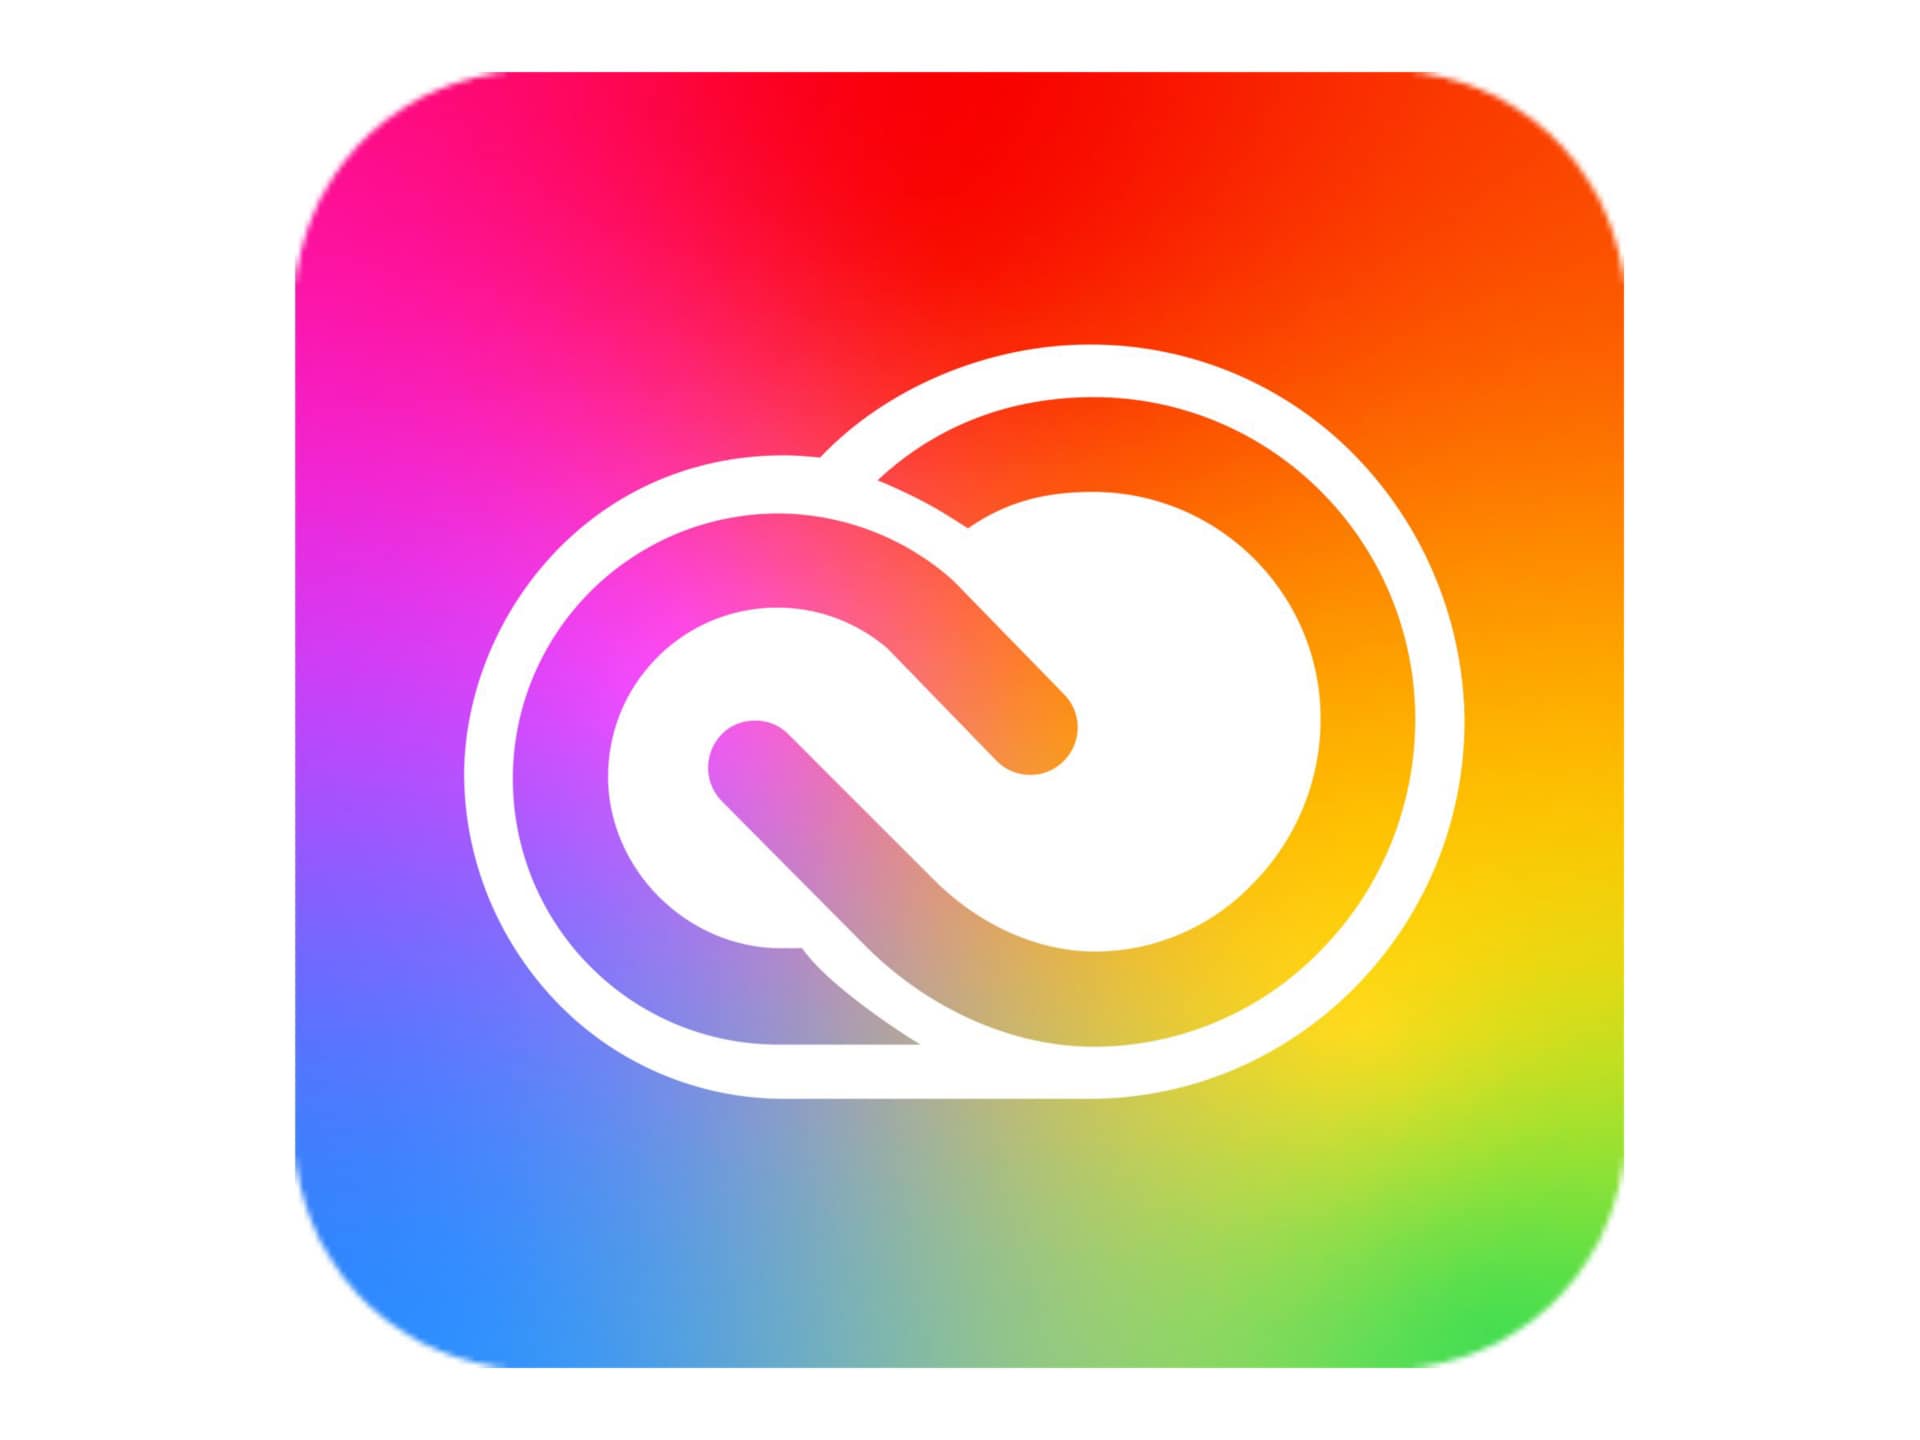 Adobe Creative Cloud for Enterprise - All Apps - Subscription New (4 months) - 1 device